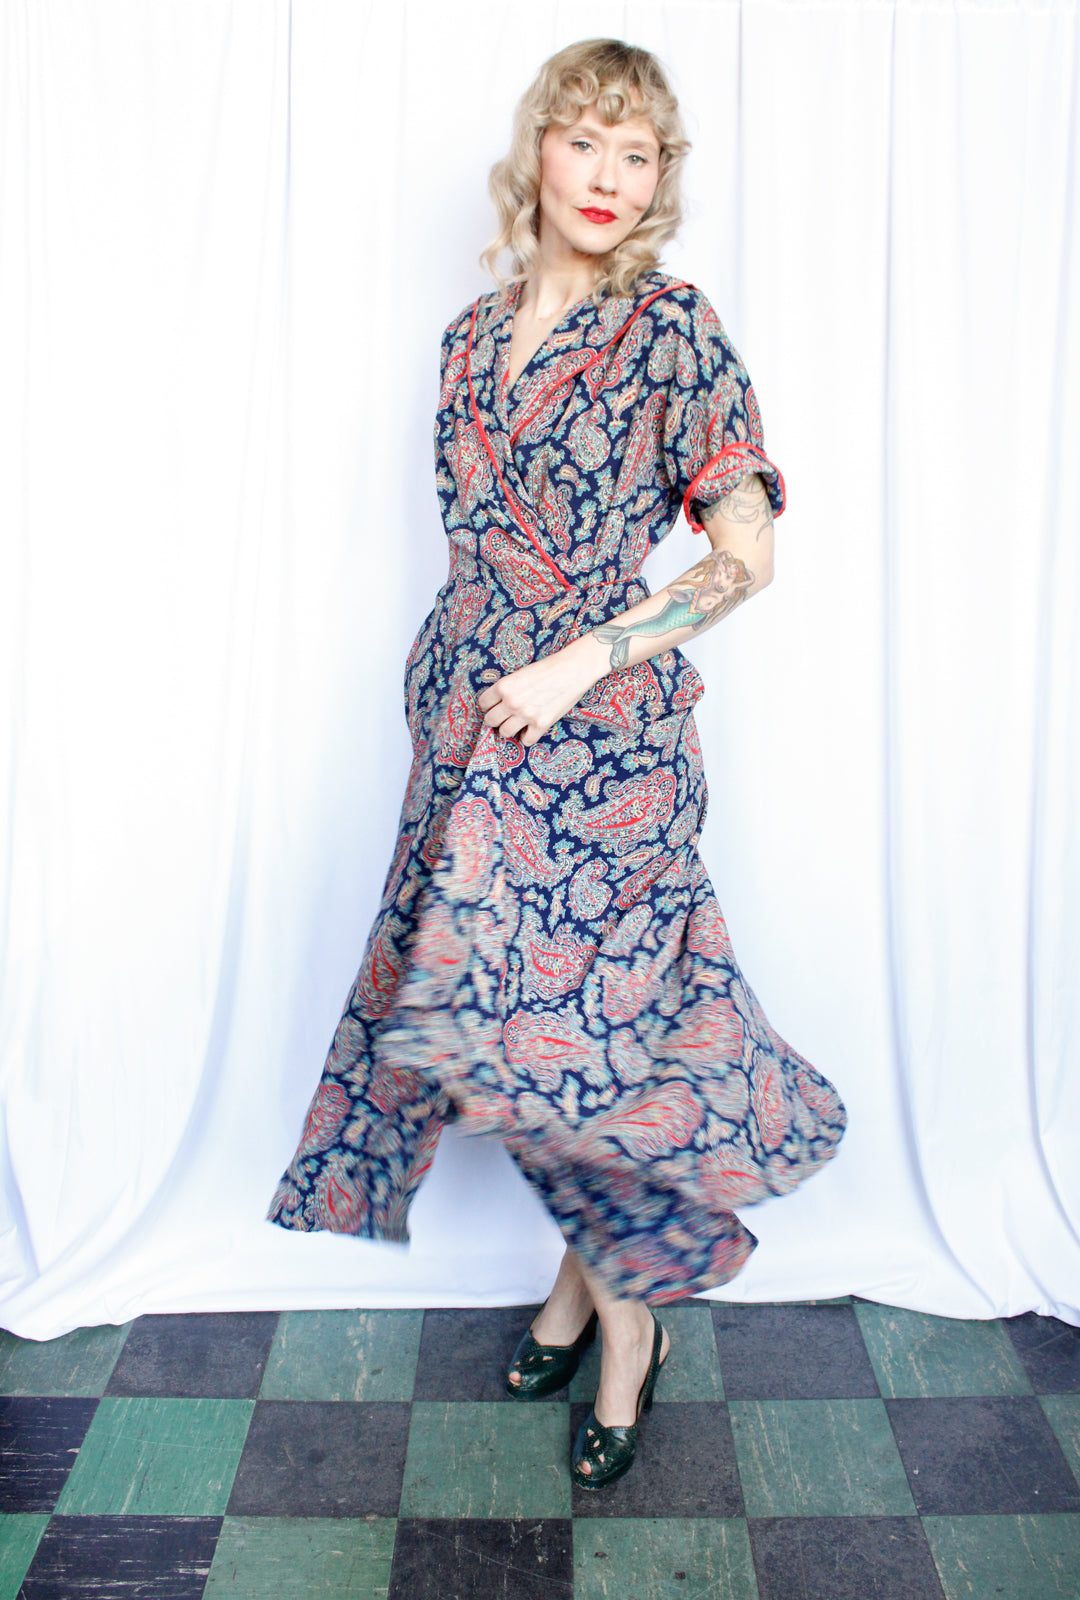 1940s Kamore Cold Rayon Paisley Dressing Gown - M/L